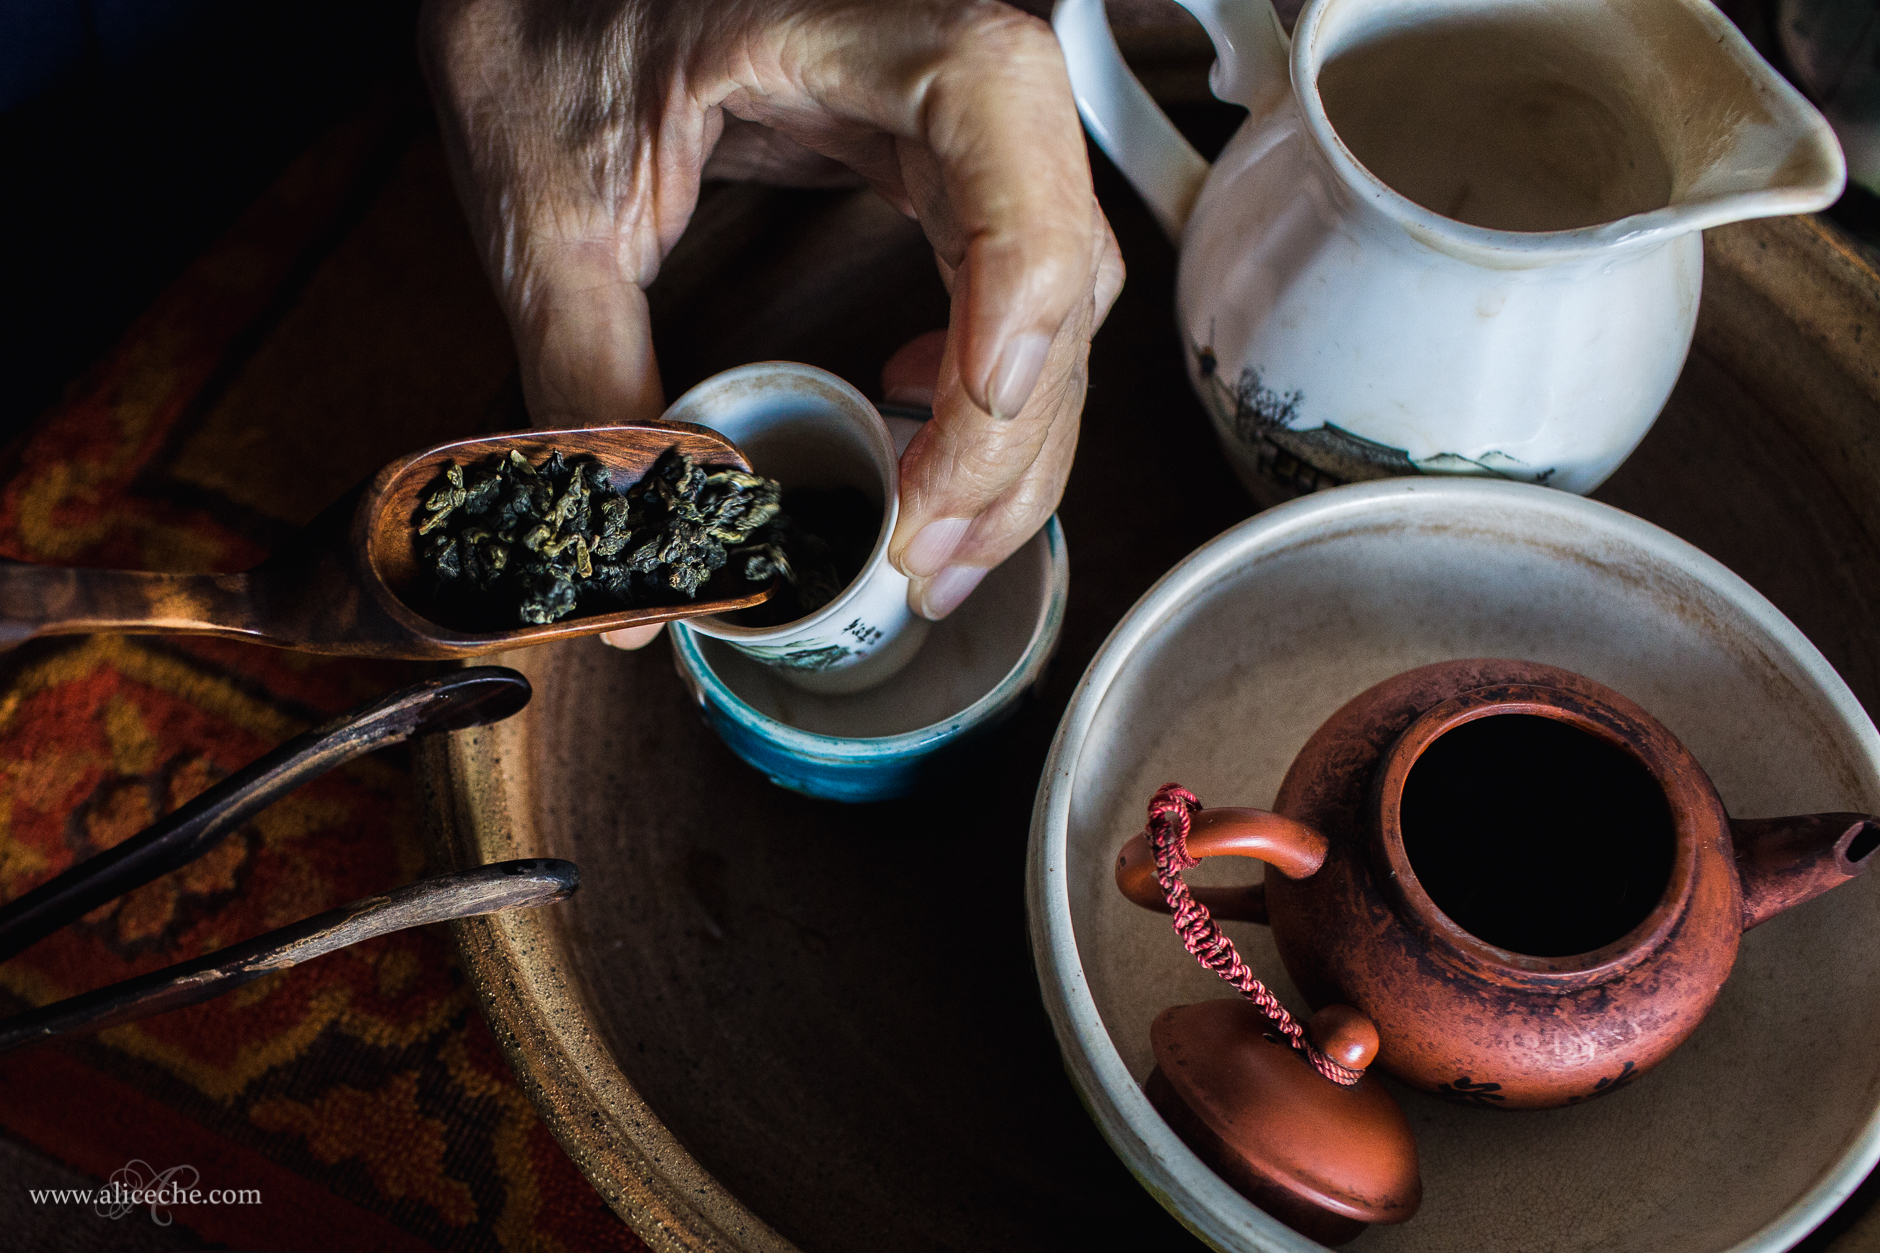 alice-che-photography-making-tea-with-grandpa-pouring-tea-leaves